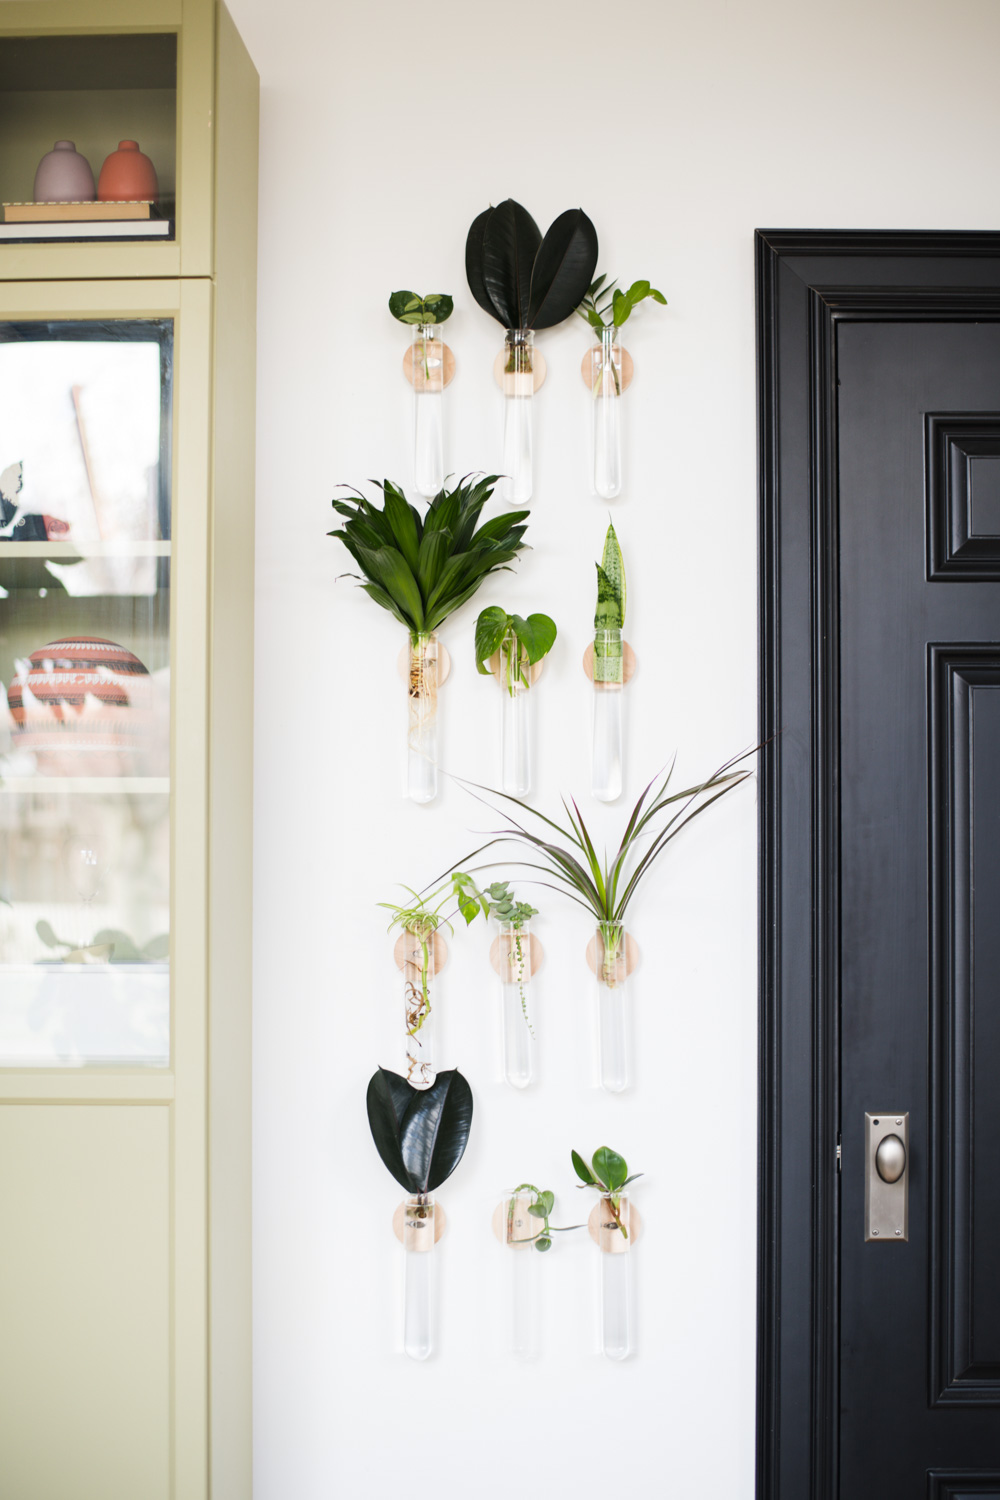 Multiple planters filled with cuttings hanging on a wall